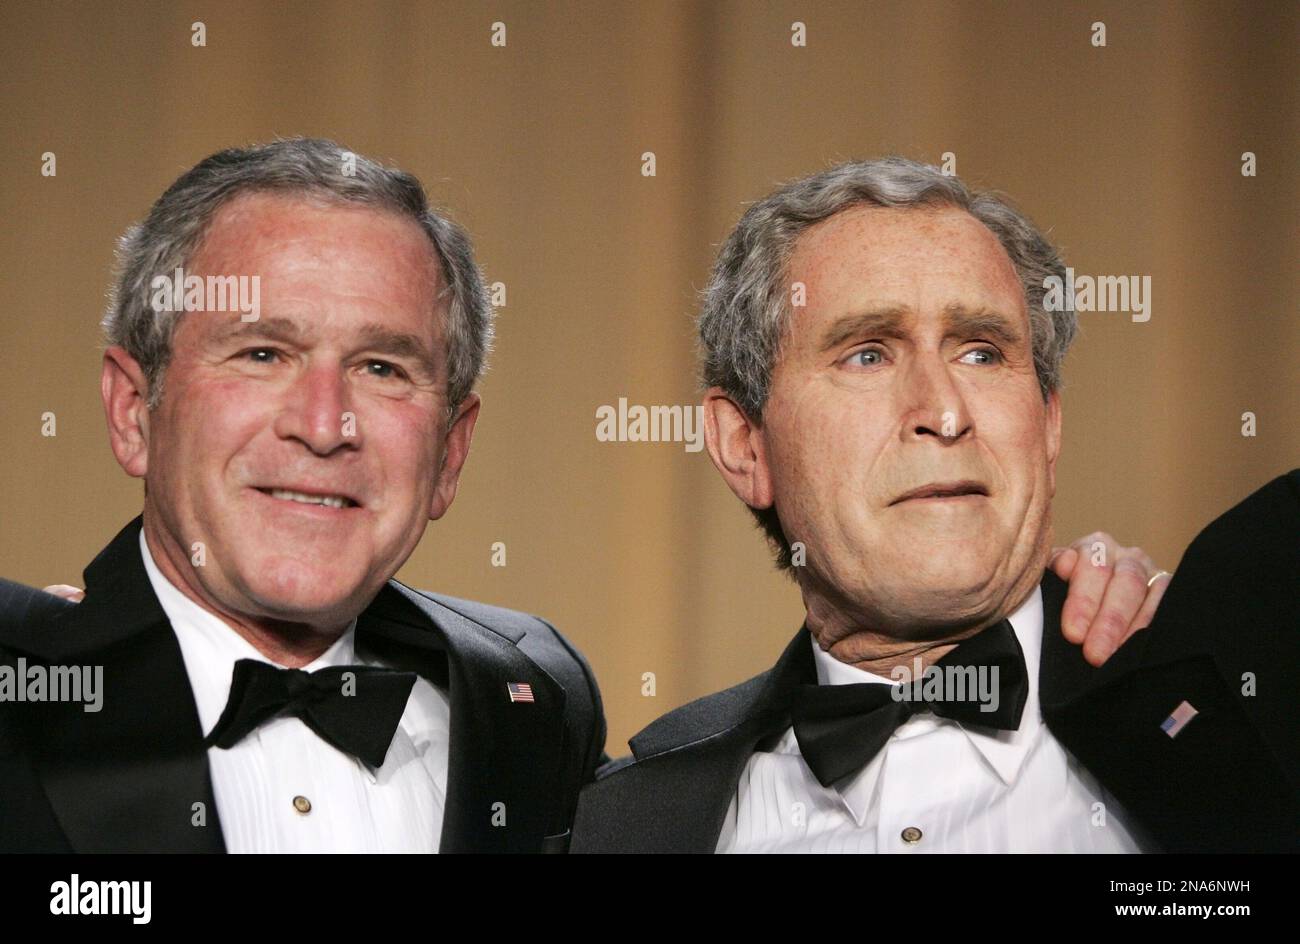 File - In this April 29, 2006 file photo, President George W. Bush, left, and Steve Bridges, a comedian and Bush impersonator pose during the White House Correspondents' Association's 92nd annual awards dinner in Washington. Comic impressionist Bridges, best known for impersonating former President George W. Bush, has died at home in Los Angeles. Bridges, 48, was found unresponsive by a housekeeper on Saturday. The coroner's office says it is being investigated as an apparently natural death but an autopsy will be conducted. (AP Photo/Haraz N. Ghanbari, File) Stock Photo